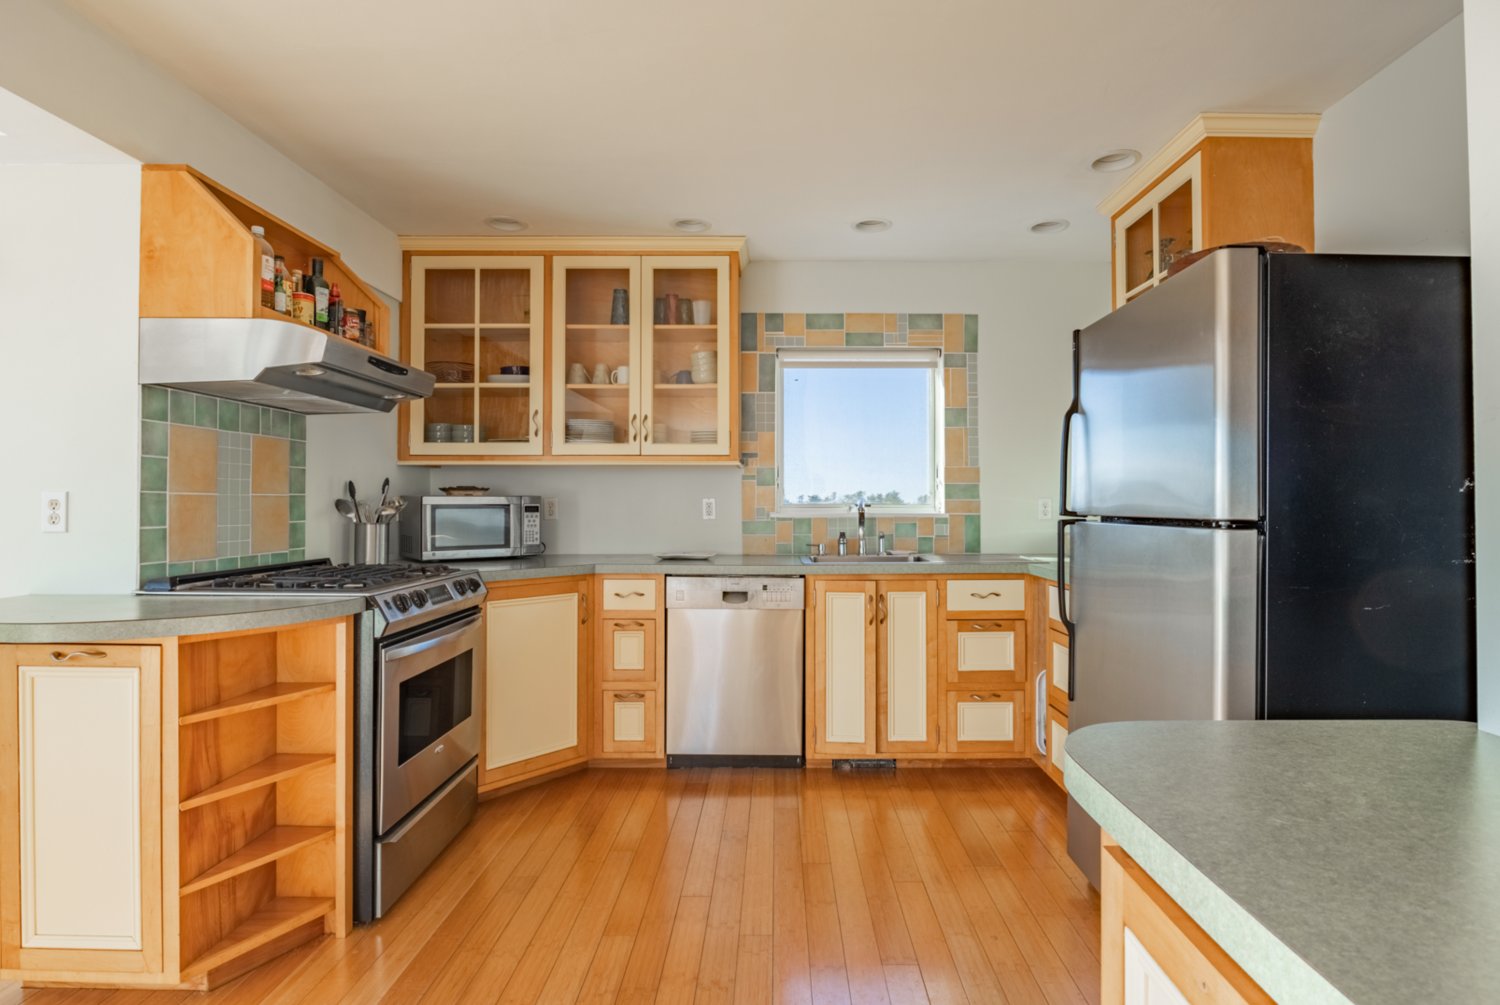 The spacious kitchen has wood floors and stainless-steel appliances by Amana, GE and Bosch.